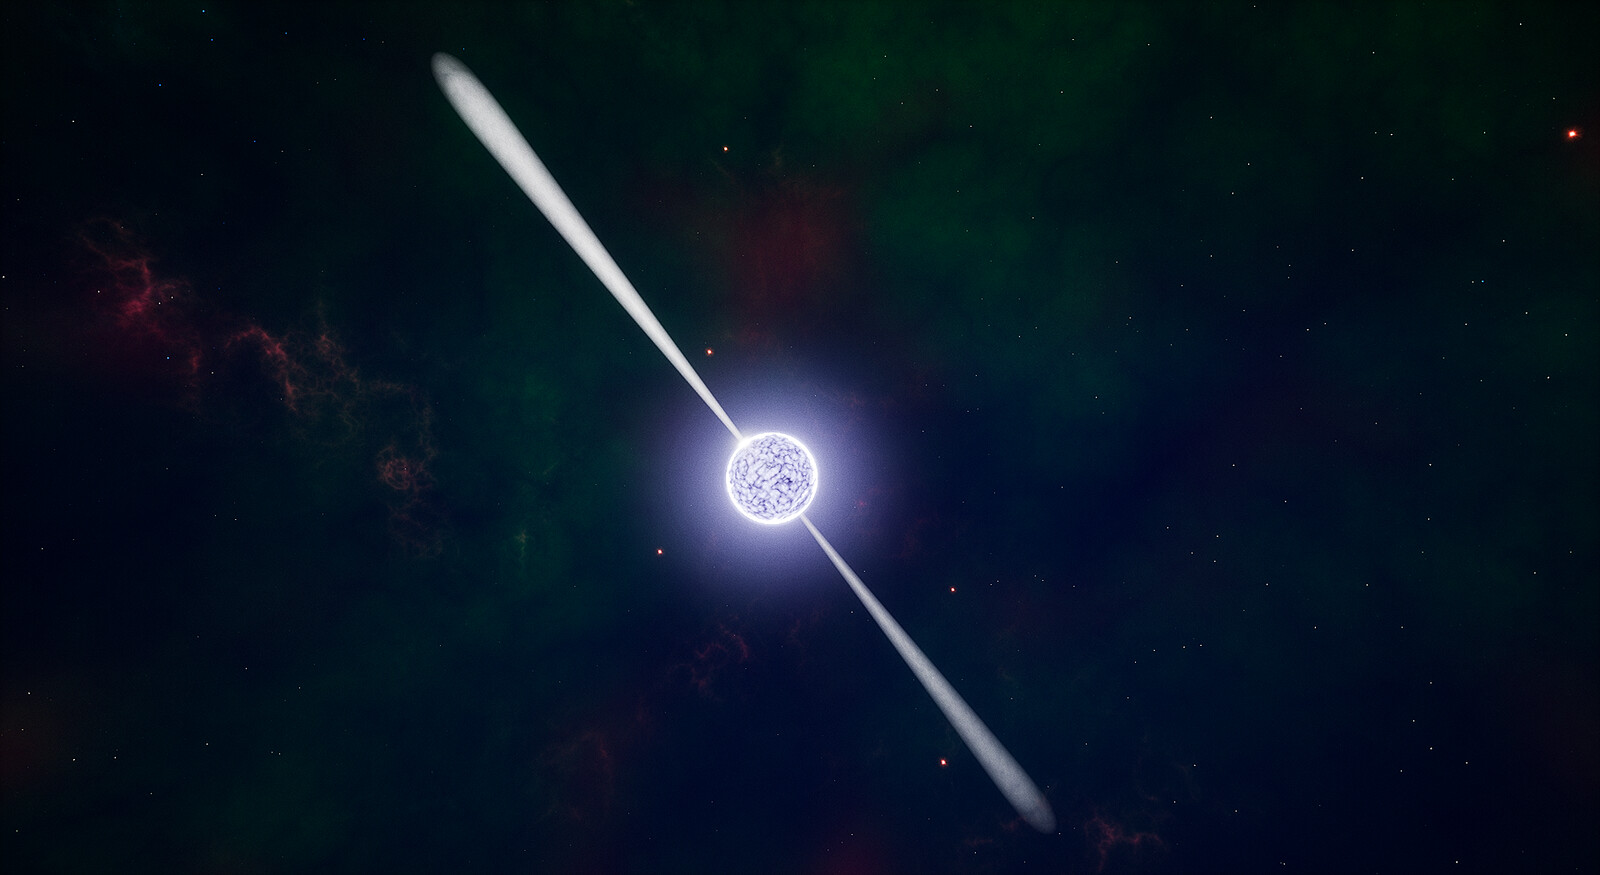 My artistic interpretation of the Spinning Neutron Star. If they spin towards Earth, they are called Pulsars. The highest registered speed is 716 times per second, called PSR J1748-2446ad.